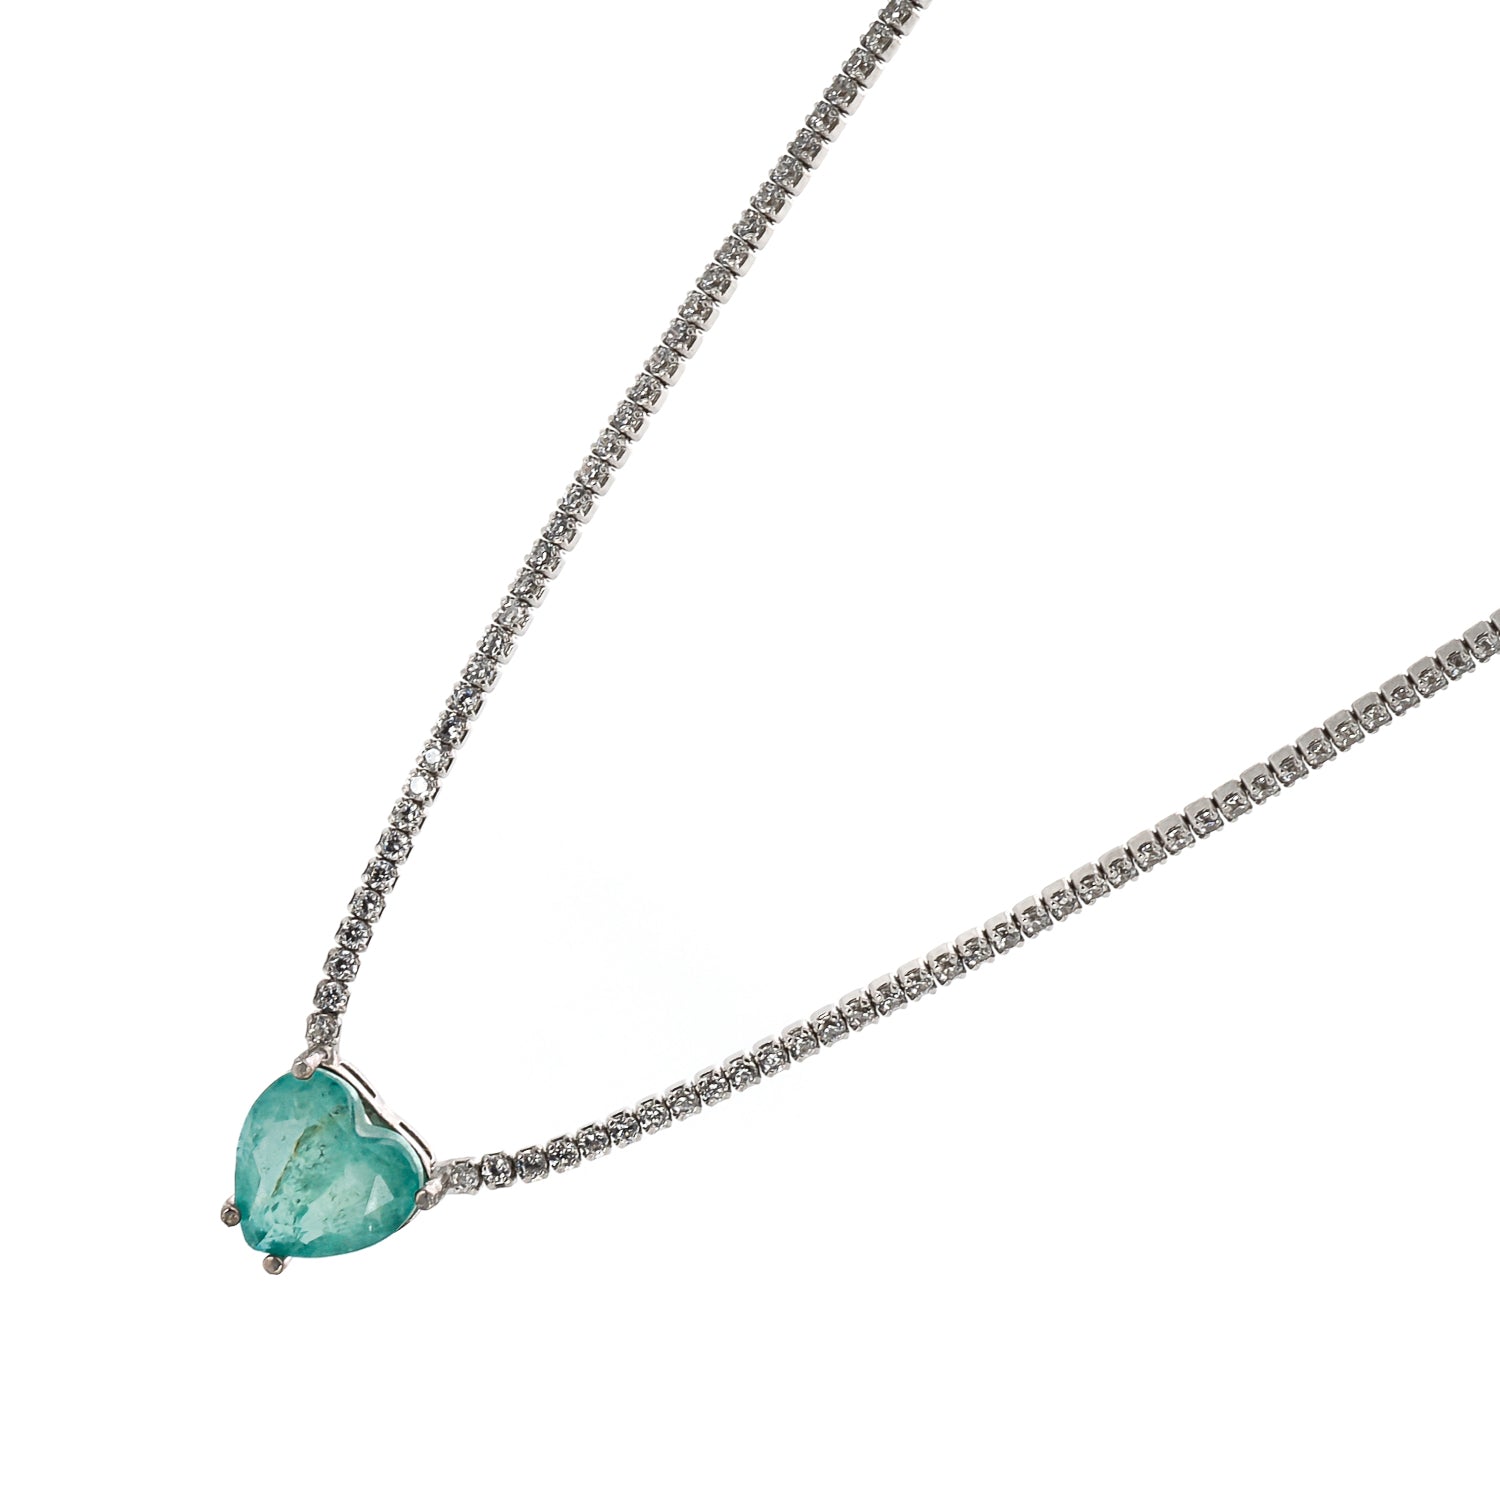 Timeless elegance: Sterling Silver Necklace with vibrant colors